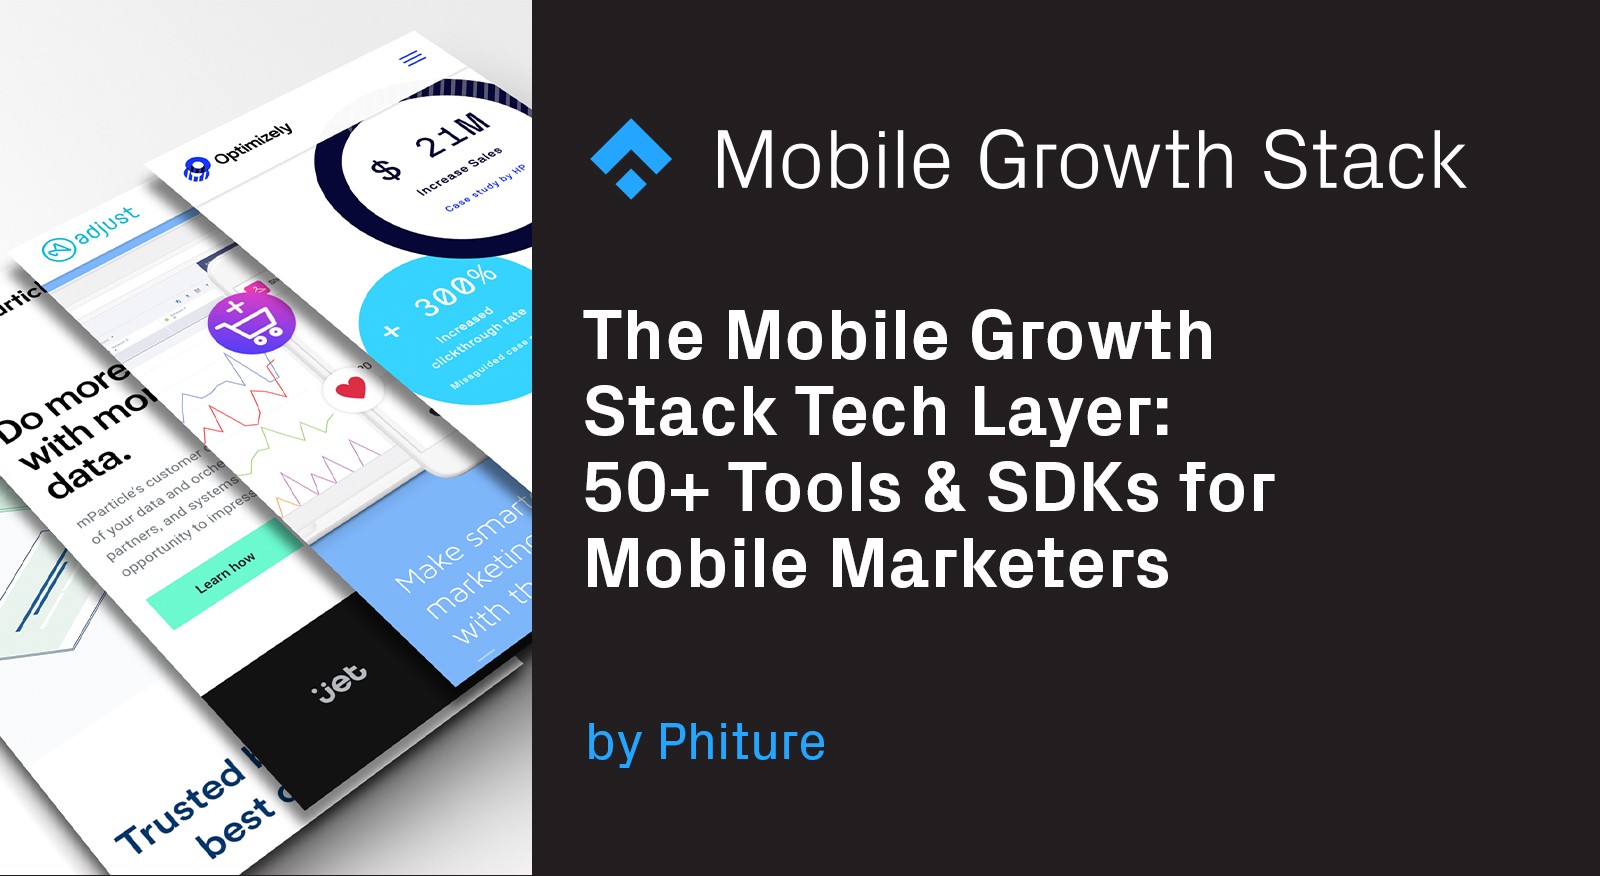 The Mobile Growth Stack Tech Layer: 50+ Tools & SDKs for Mobile Marketers